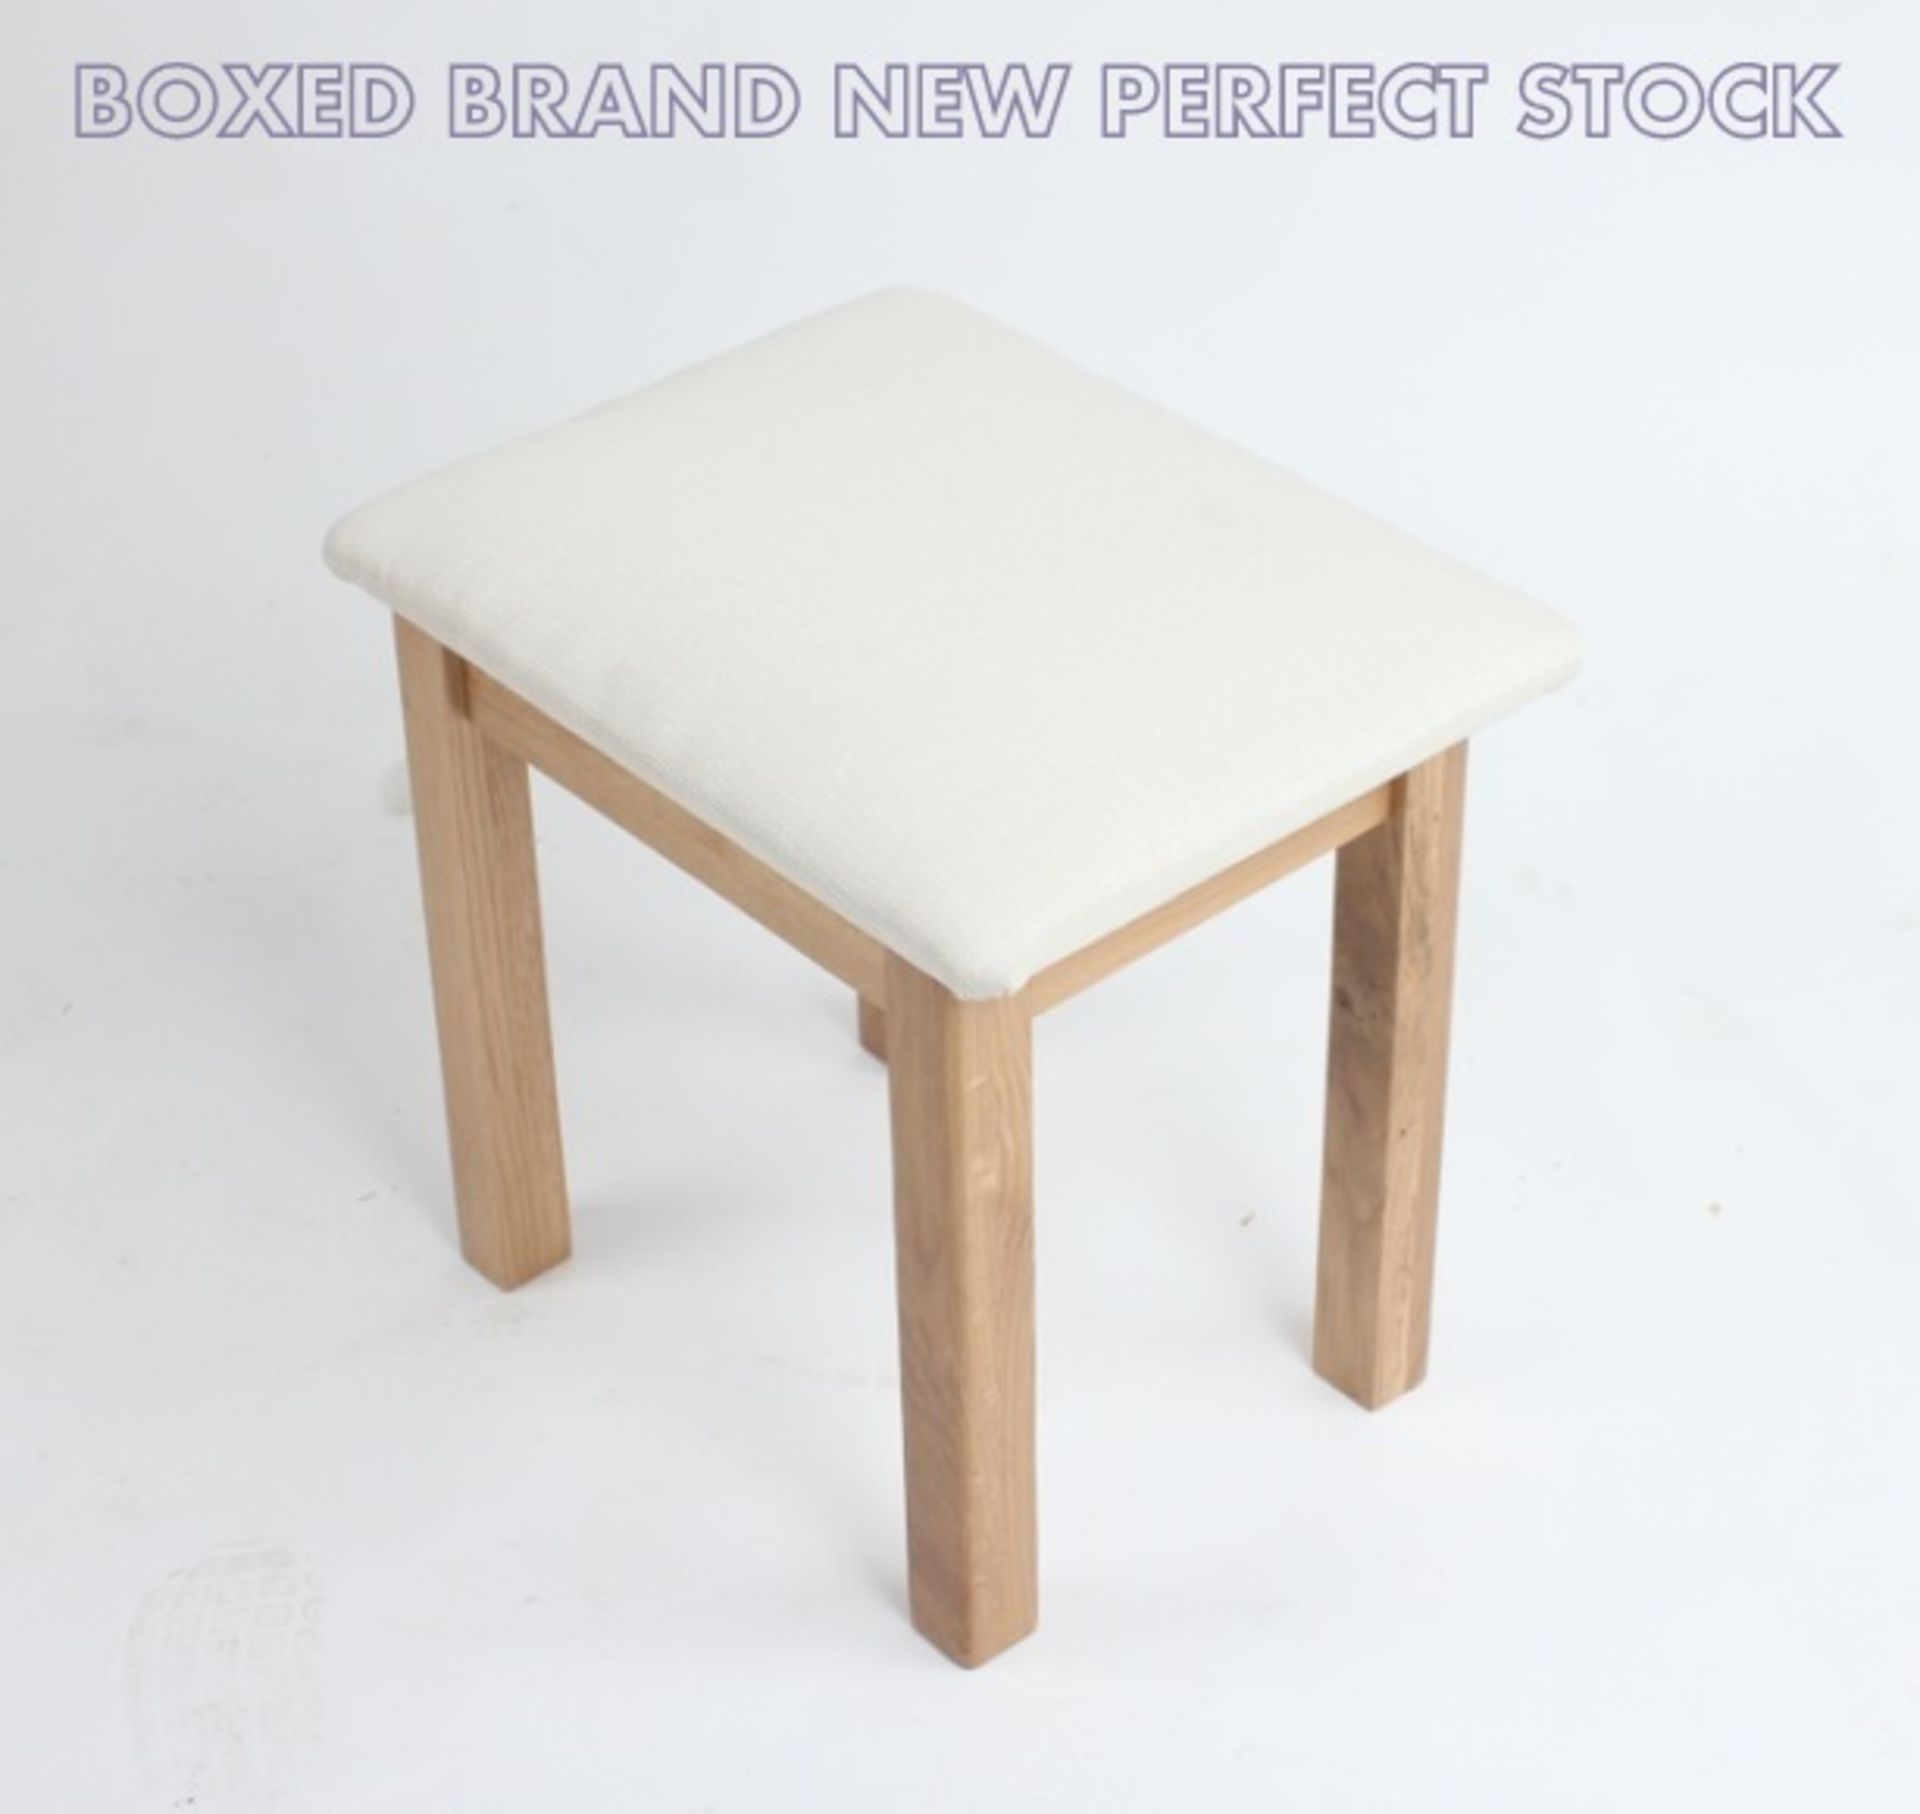 ONE BRAND NEW STOOL - KD LEGS, PLYWOOD FOR FABRIC SEAT CENTRE, SOLID OAK FOR OTHER PARTS